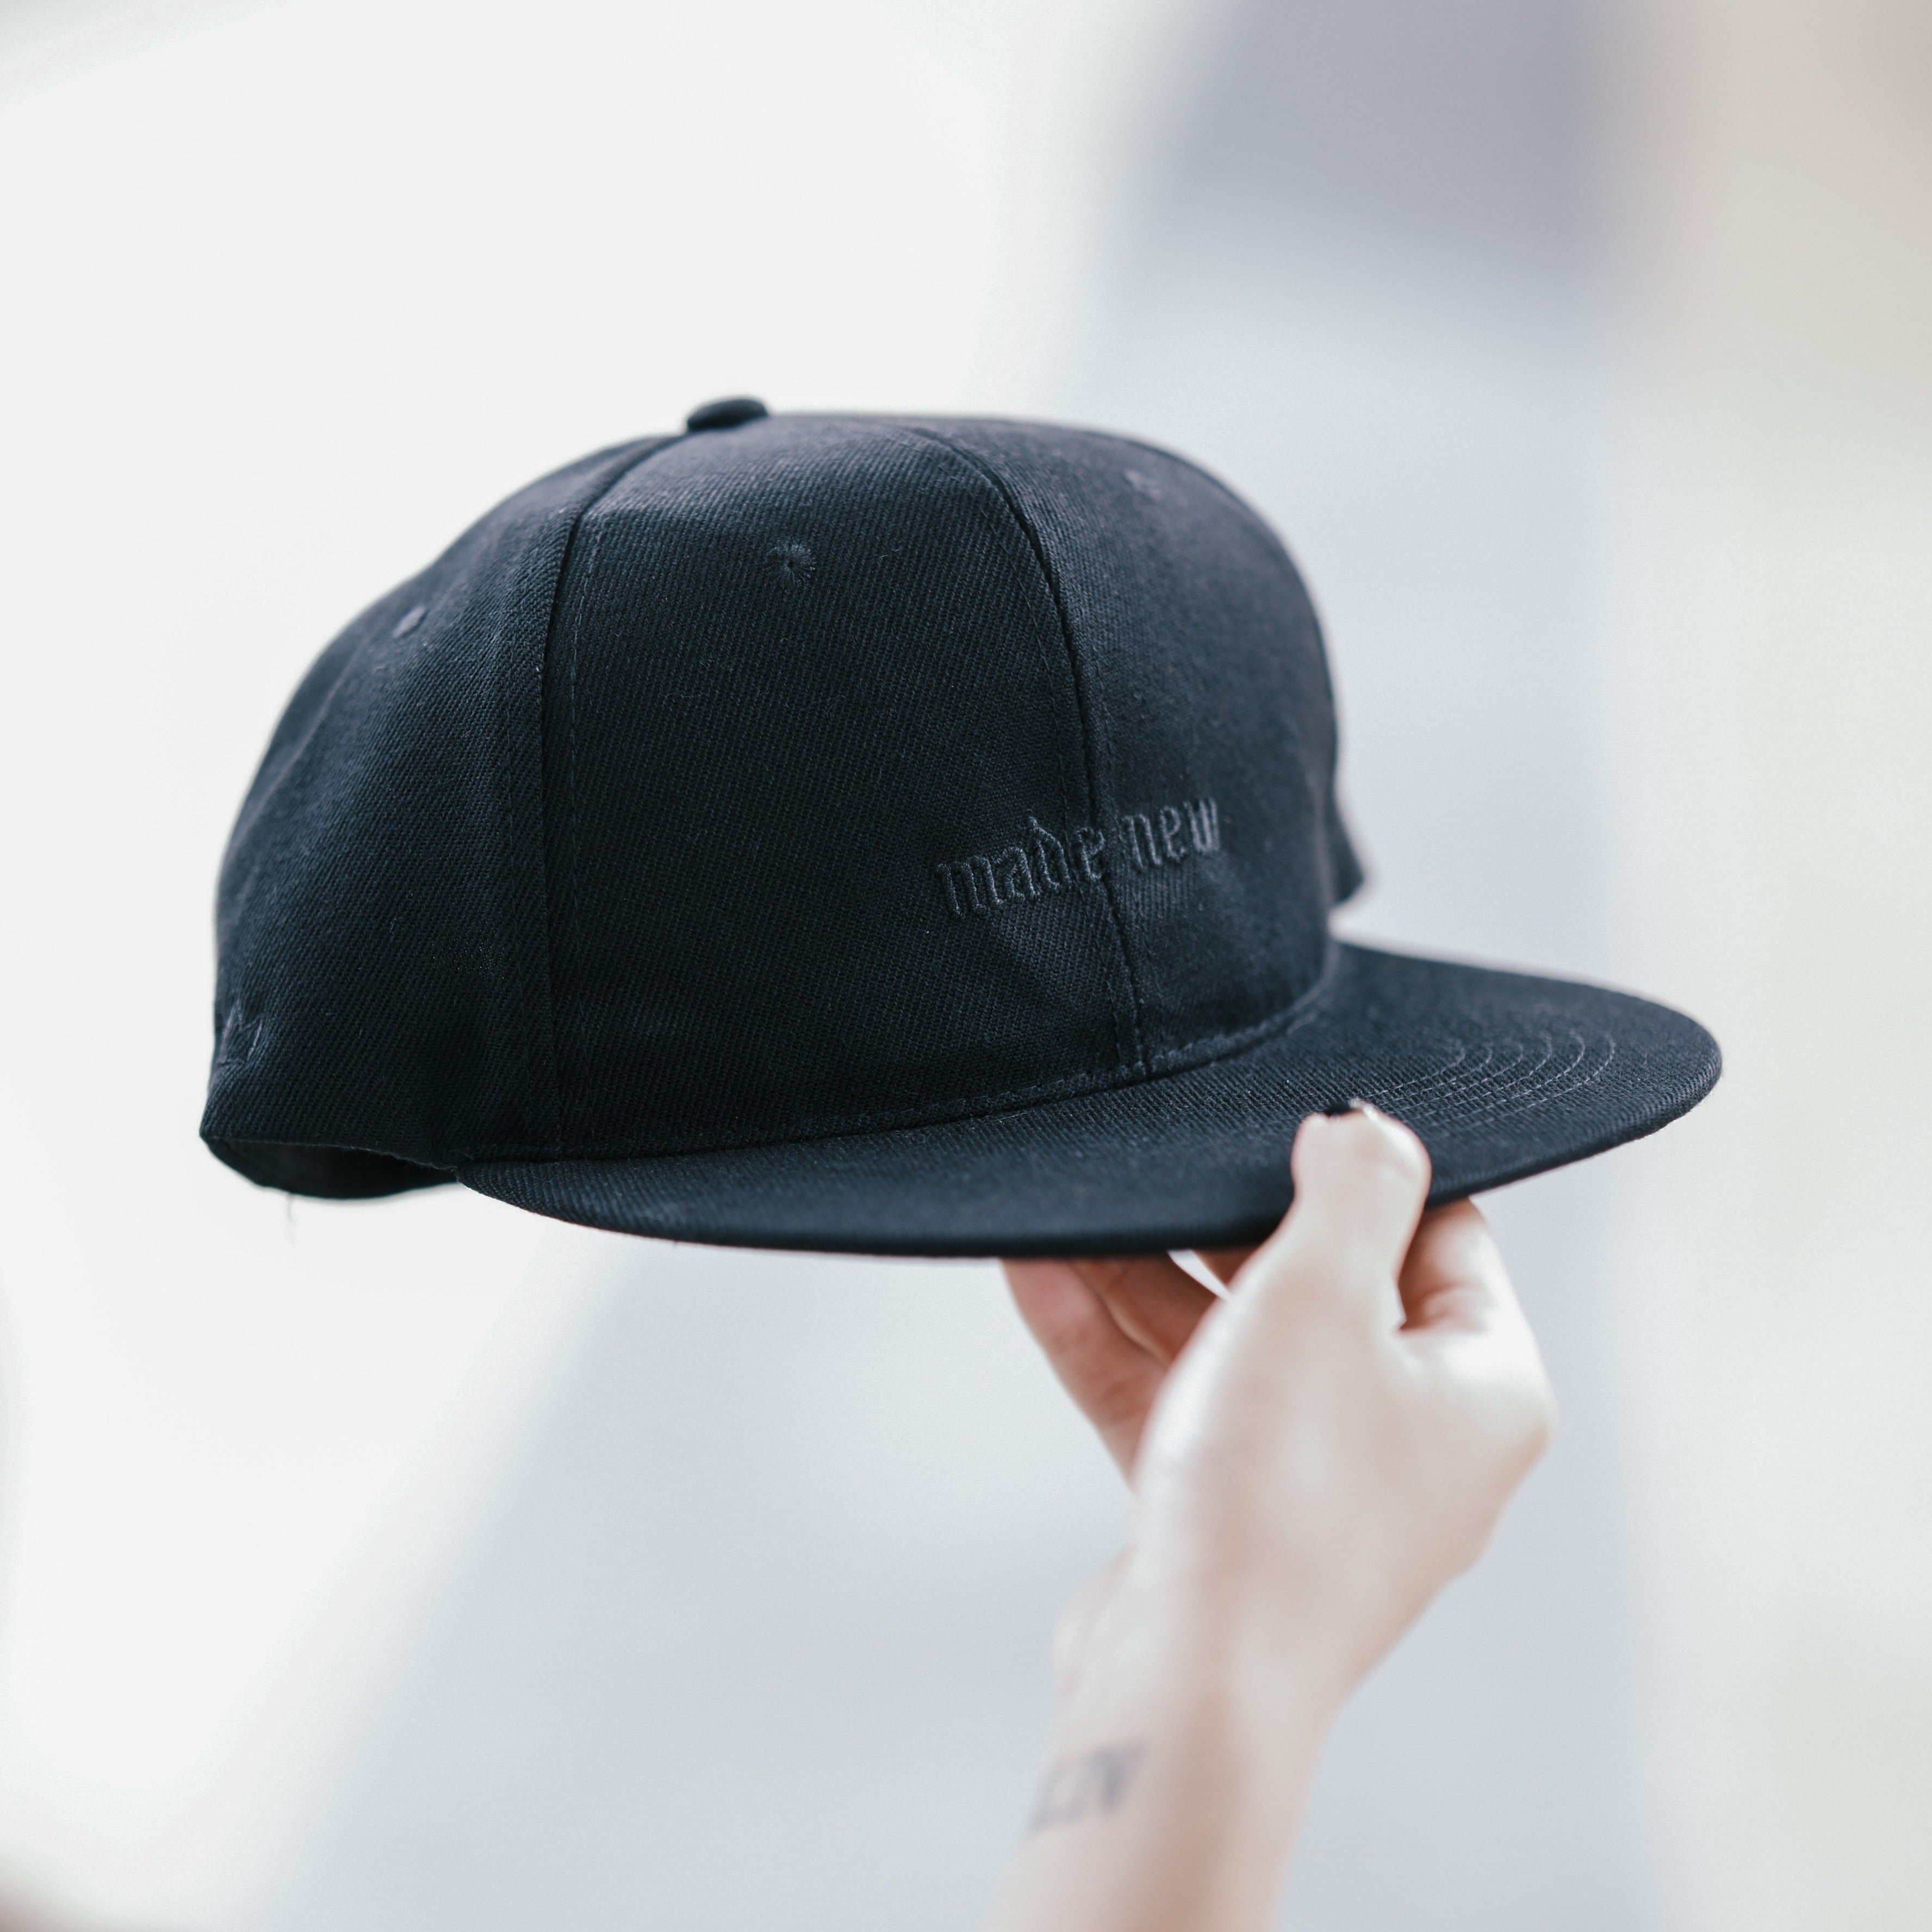 The Project J Faith Apparels Made New Caps Snapback Cap Black on Black Christian Gifts Baptism Singapore